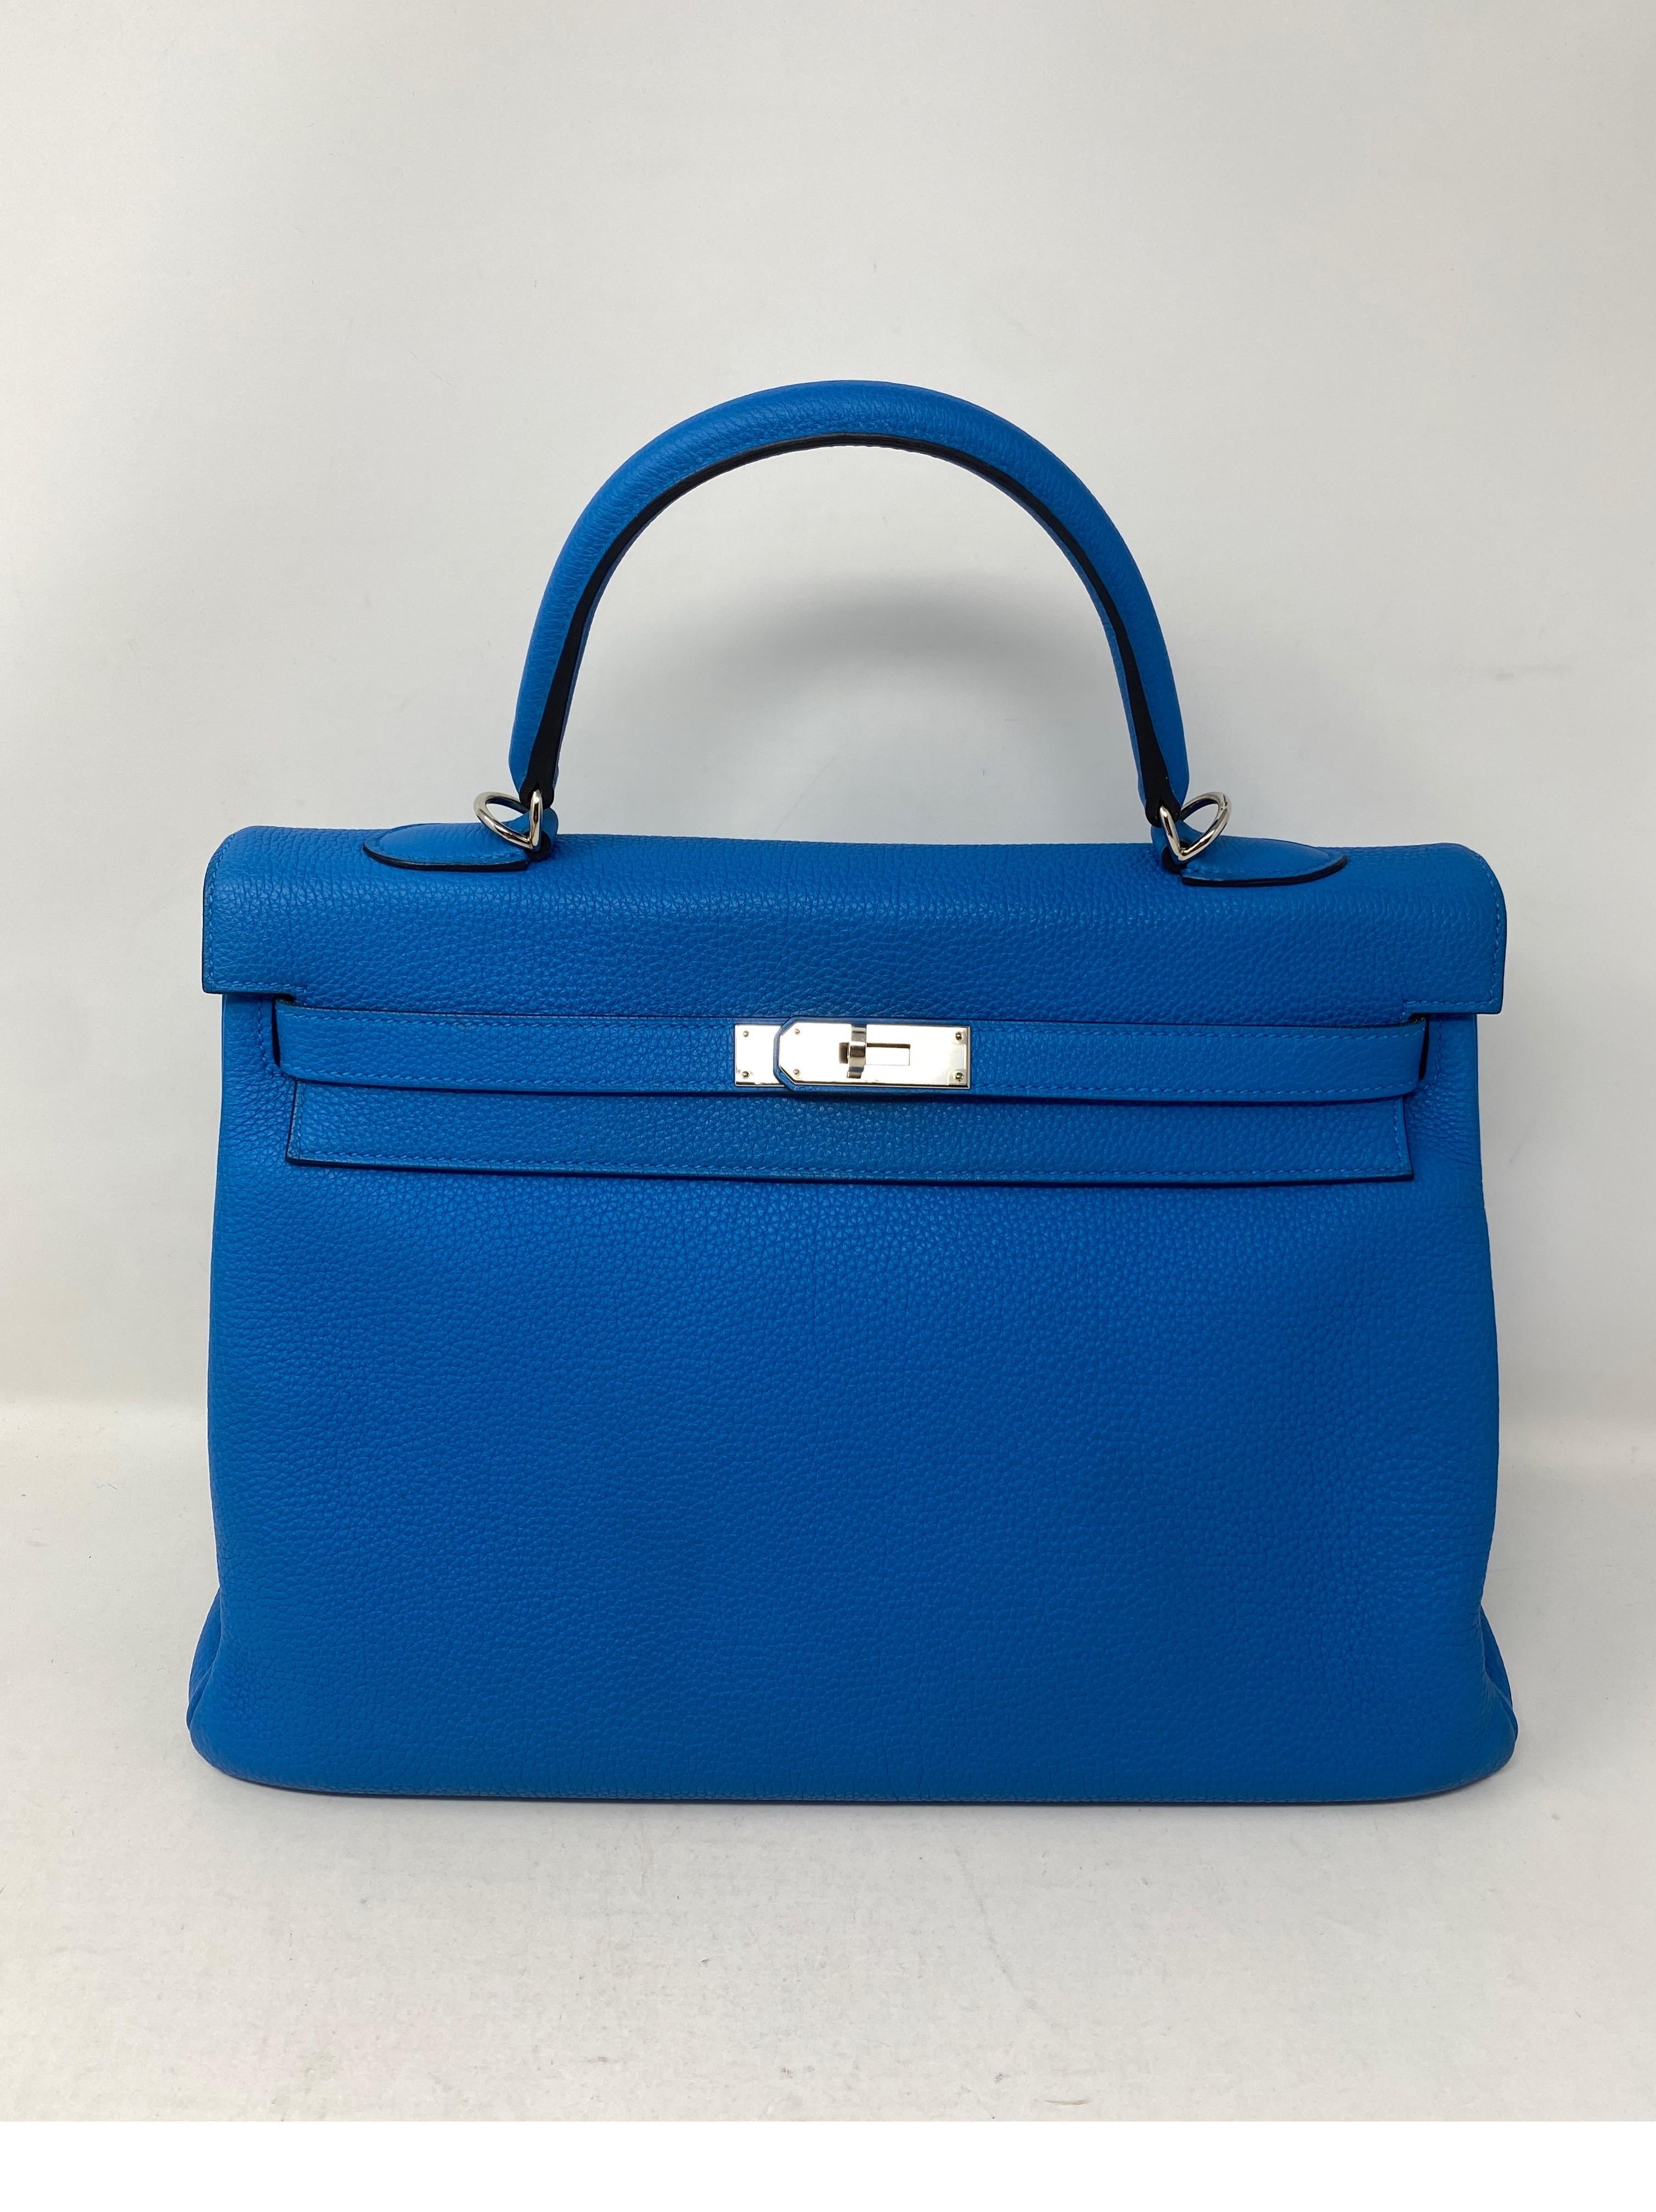 Hermes Blue Zanzibar Kelly 35 Bag. Palladium hardware. Excellent like new condition. Vibrant blue color. Togo leather. Kelly bags are classic investments. Includes clochette, lock, keys, and dust cover. Guaranteed authentic. 